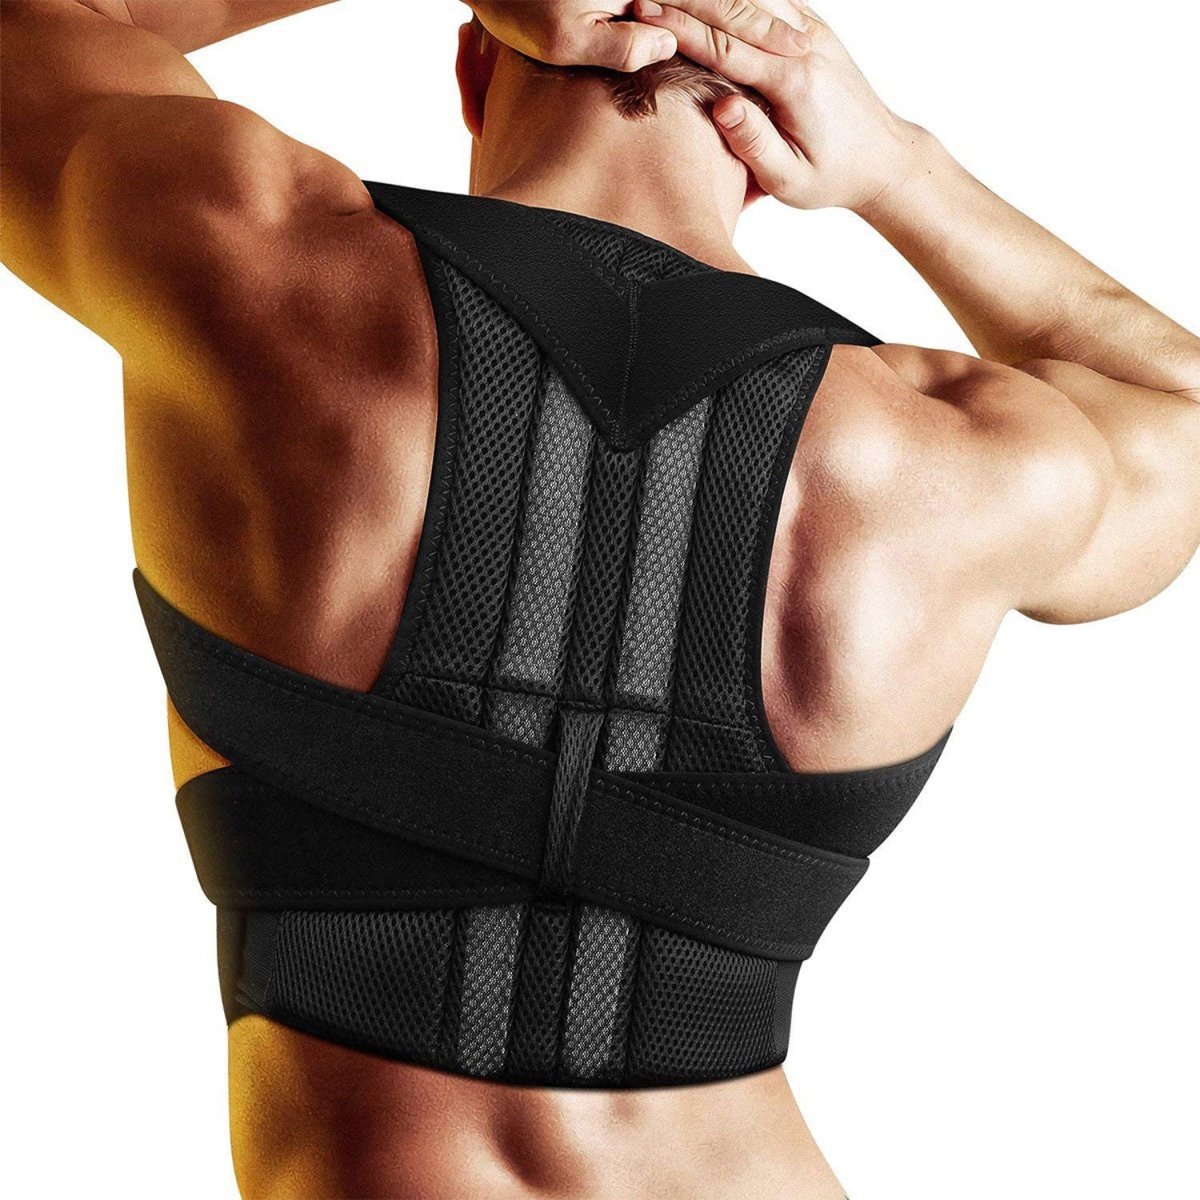 4well Posture Corrector - Posture Corrector for Men and Women